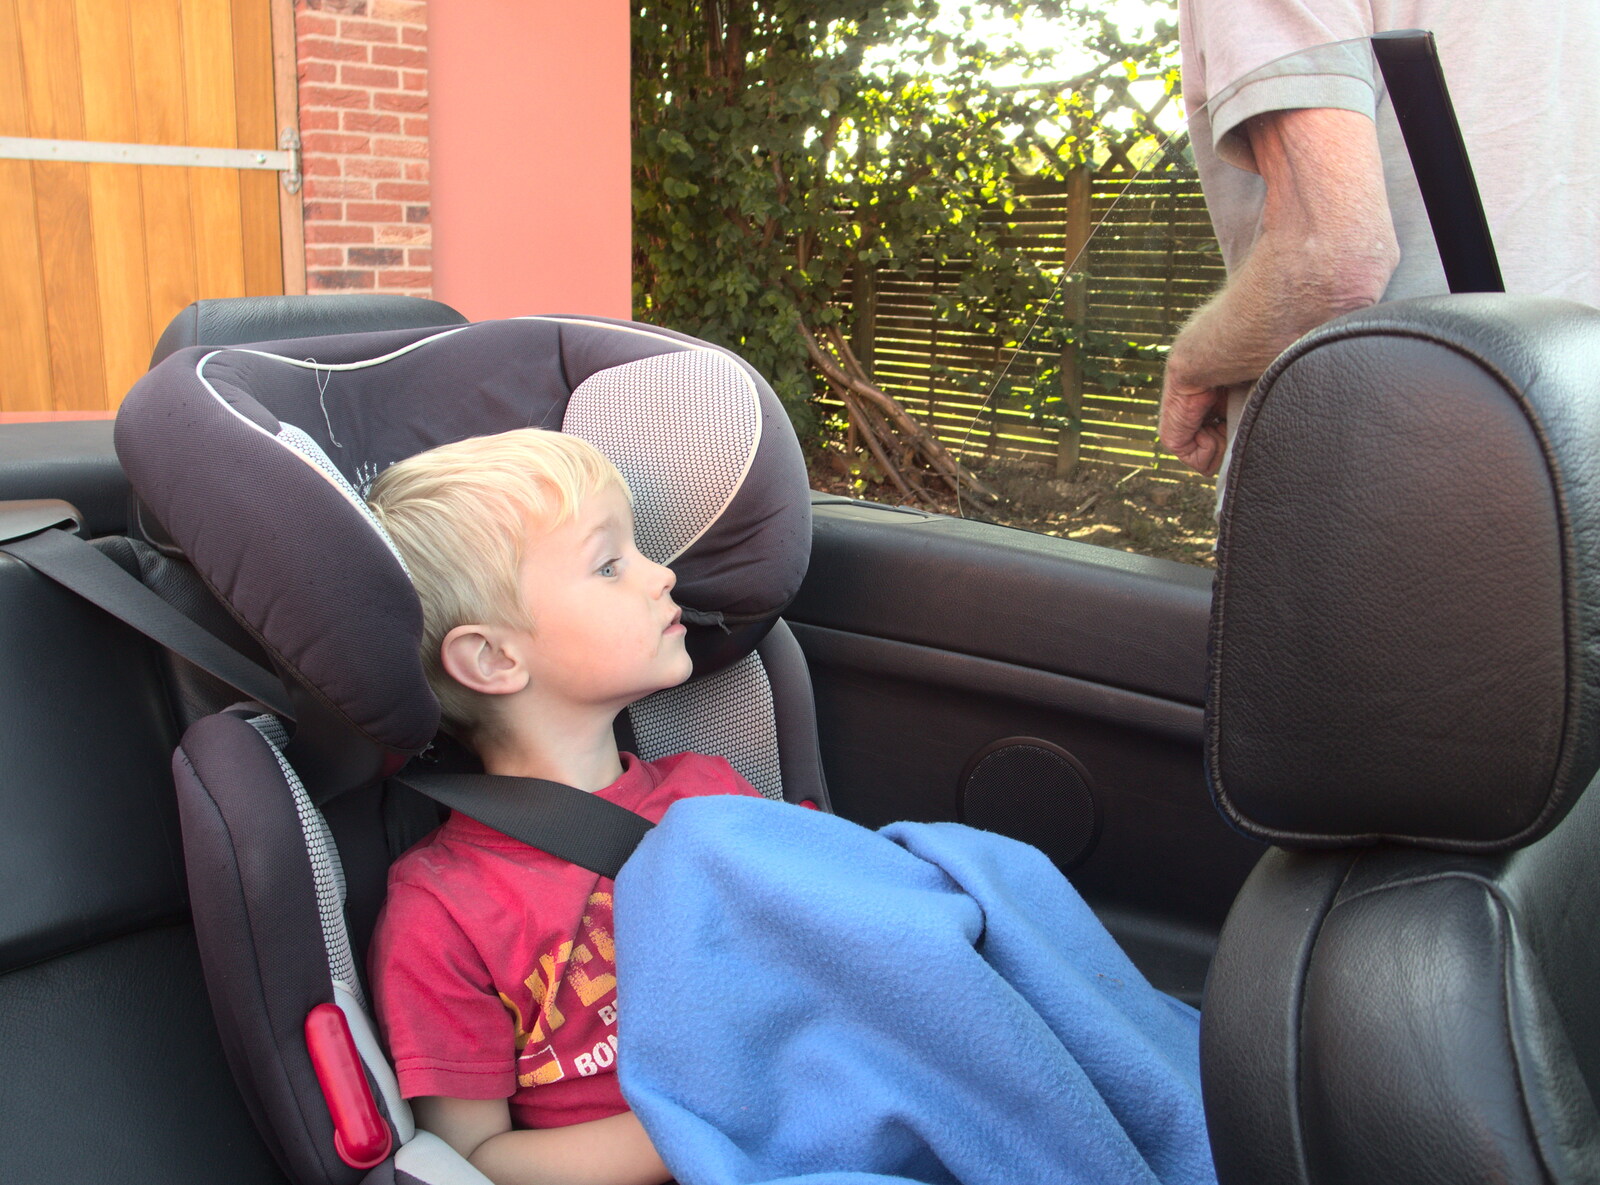 Harry in the back of the car from The BBs at Bacton, and Abbey Gardens, Bury St. Edmunds, Suffolk - 19th July 2015